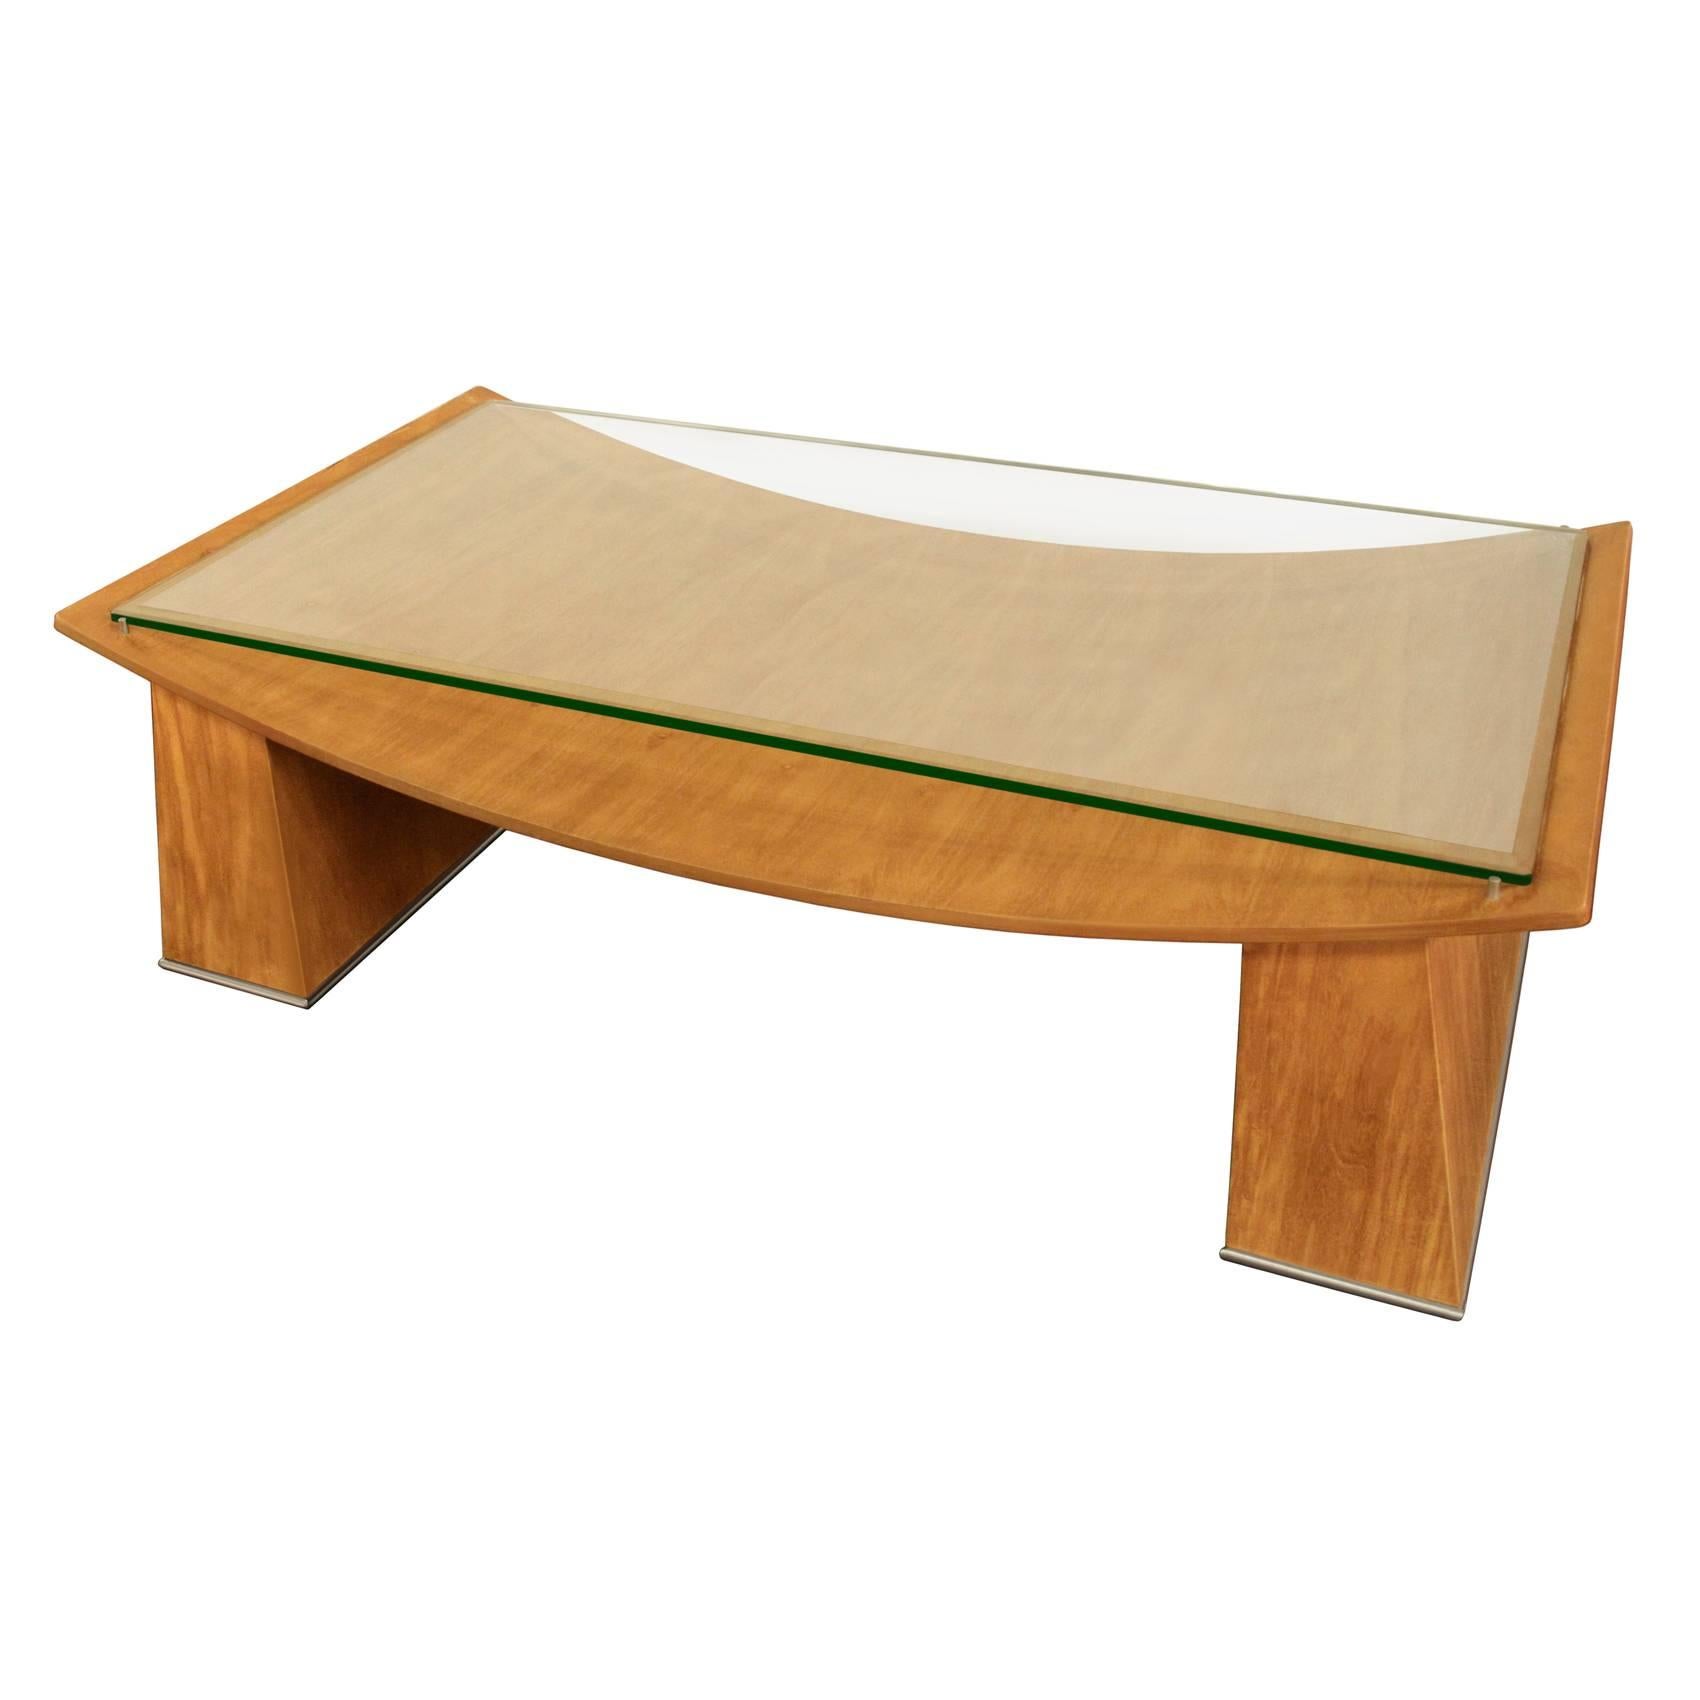 "Shinto Coffee Table" by Jay Spectre 1970s For Sale